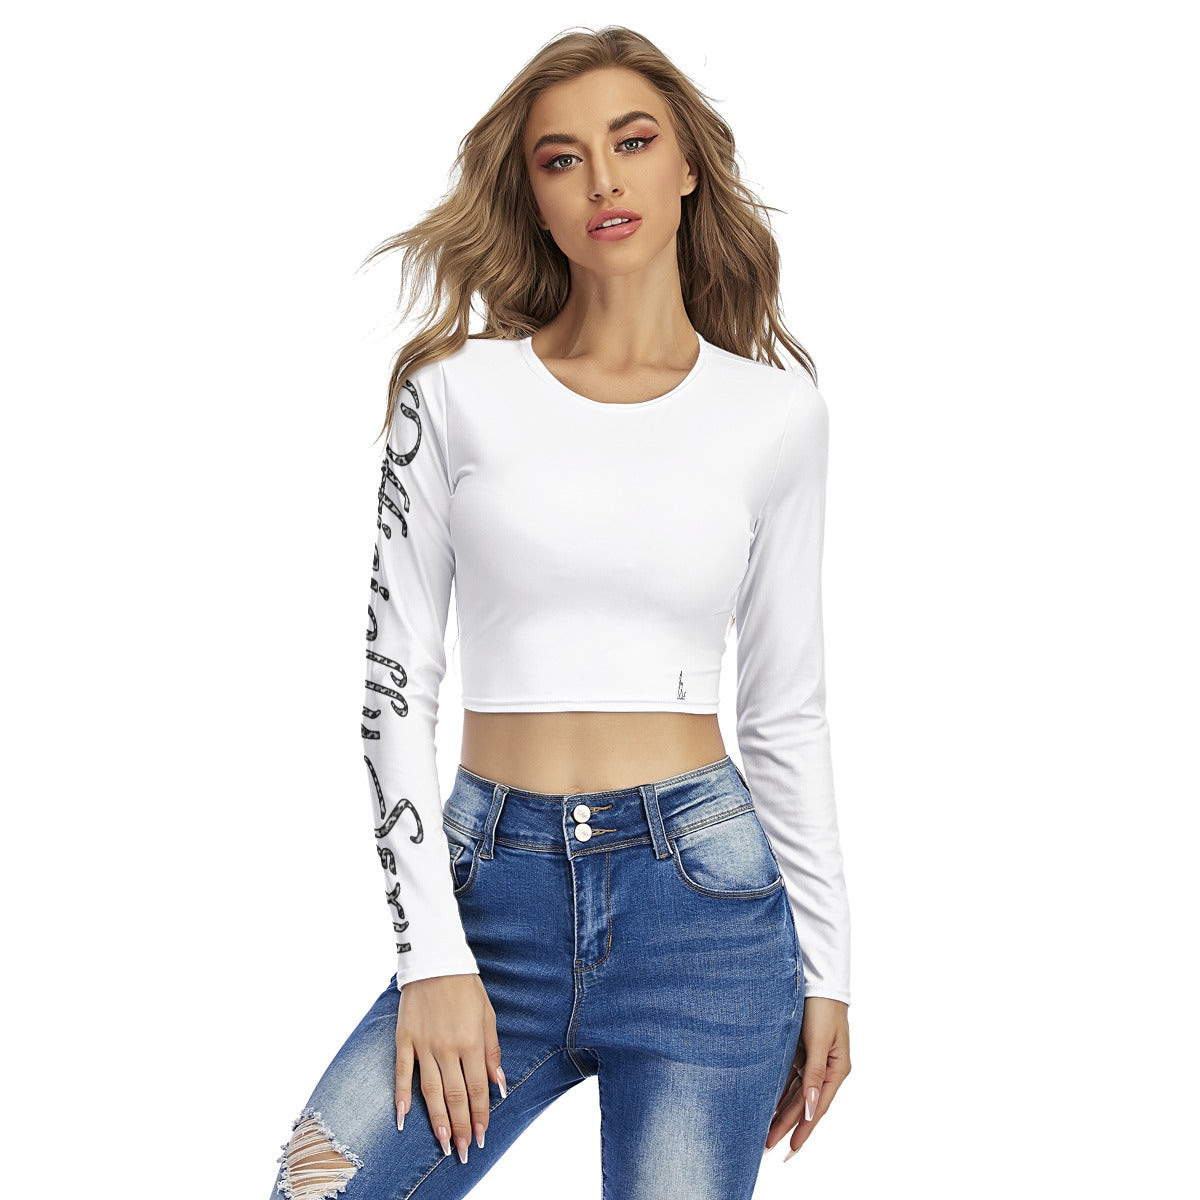 Officially Sexy Snow Leopard Print Collection Women's White Round Neck Crop Top Long Sleeve T-Shirt (English) 1